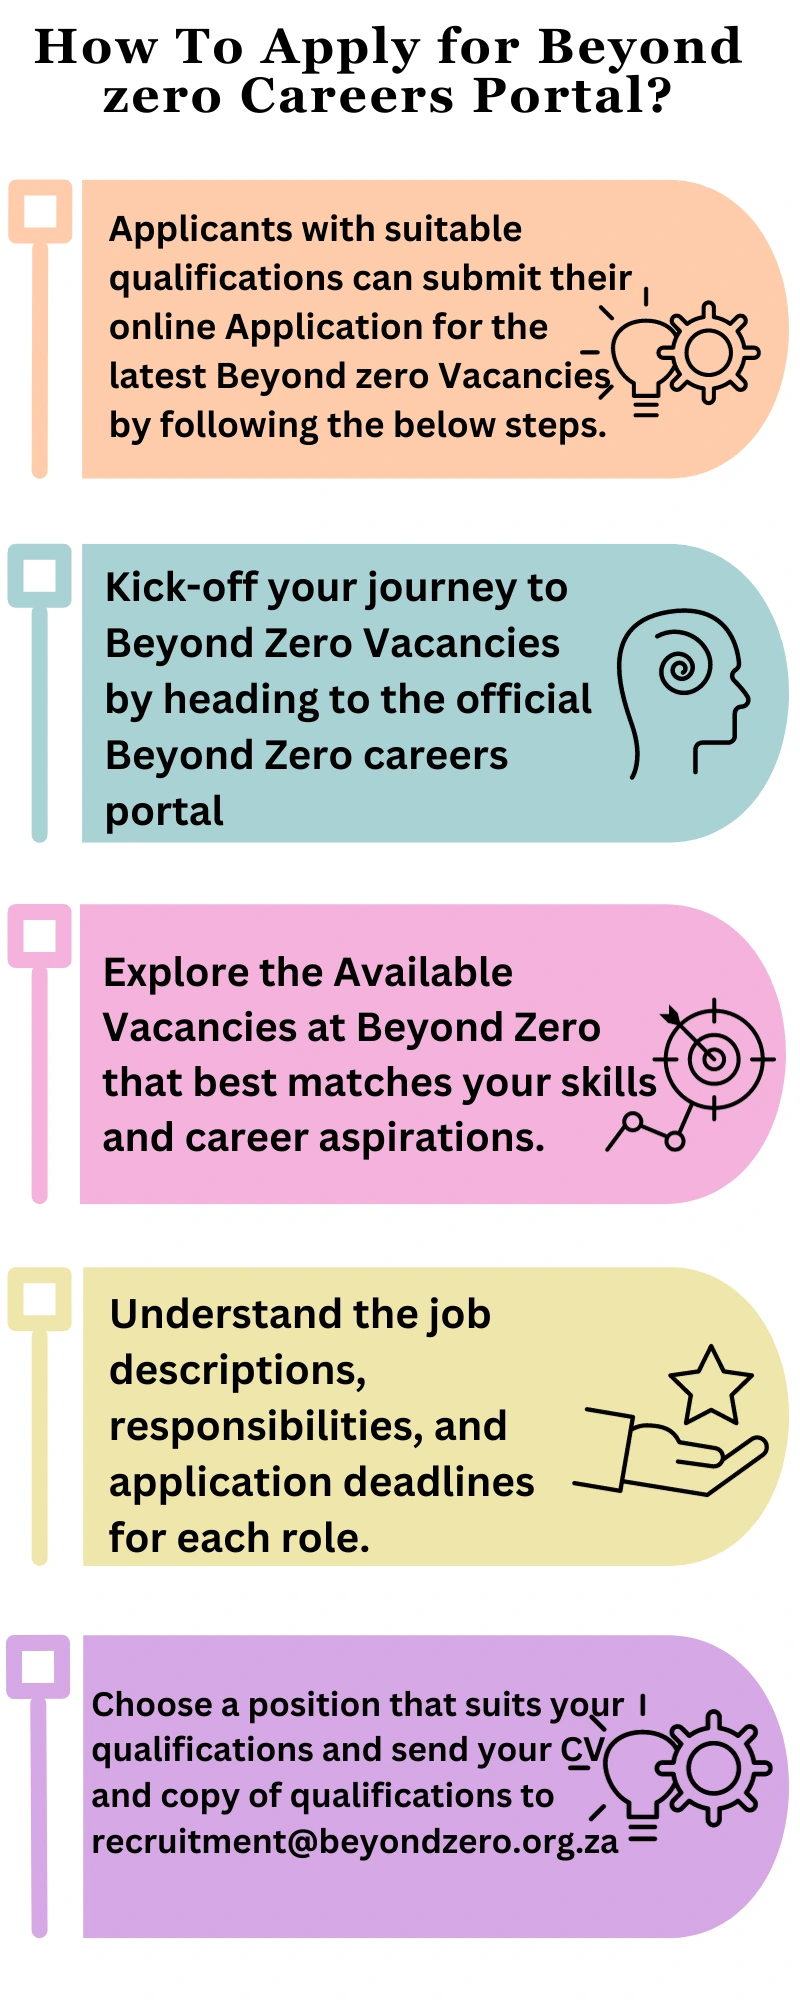 How To Apply for Beyond zero Careers Portal